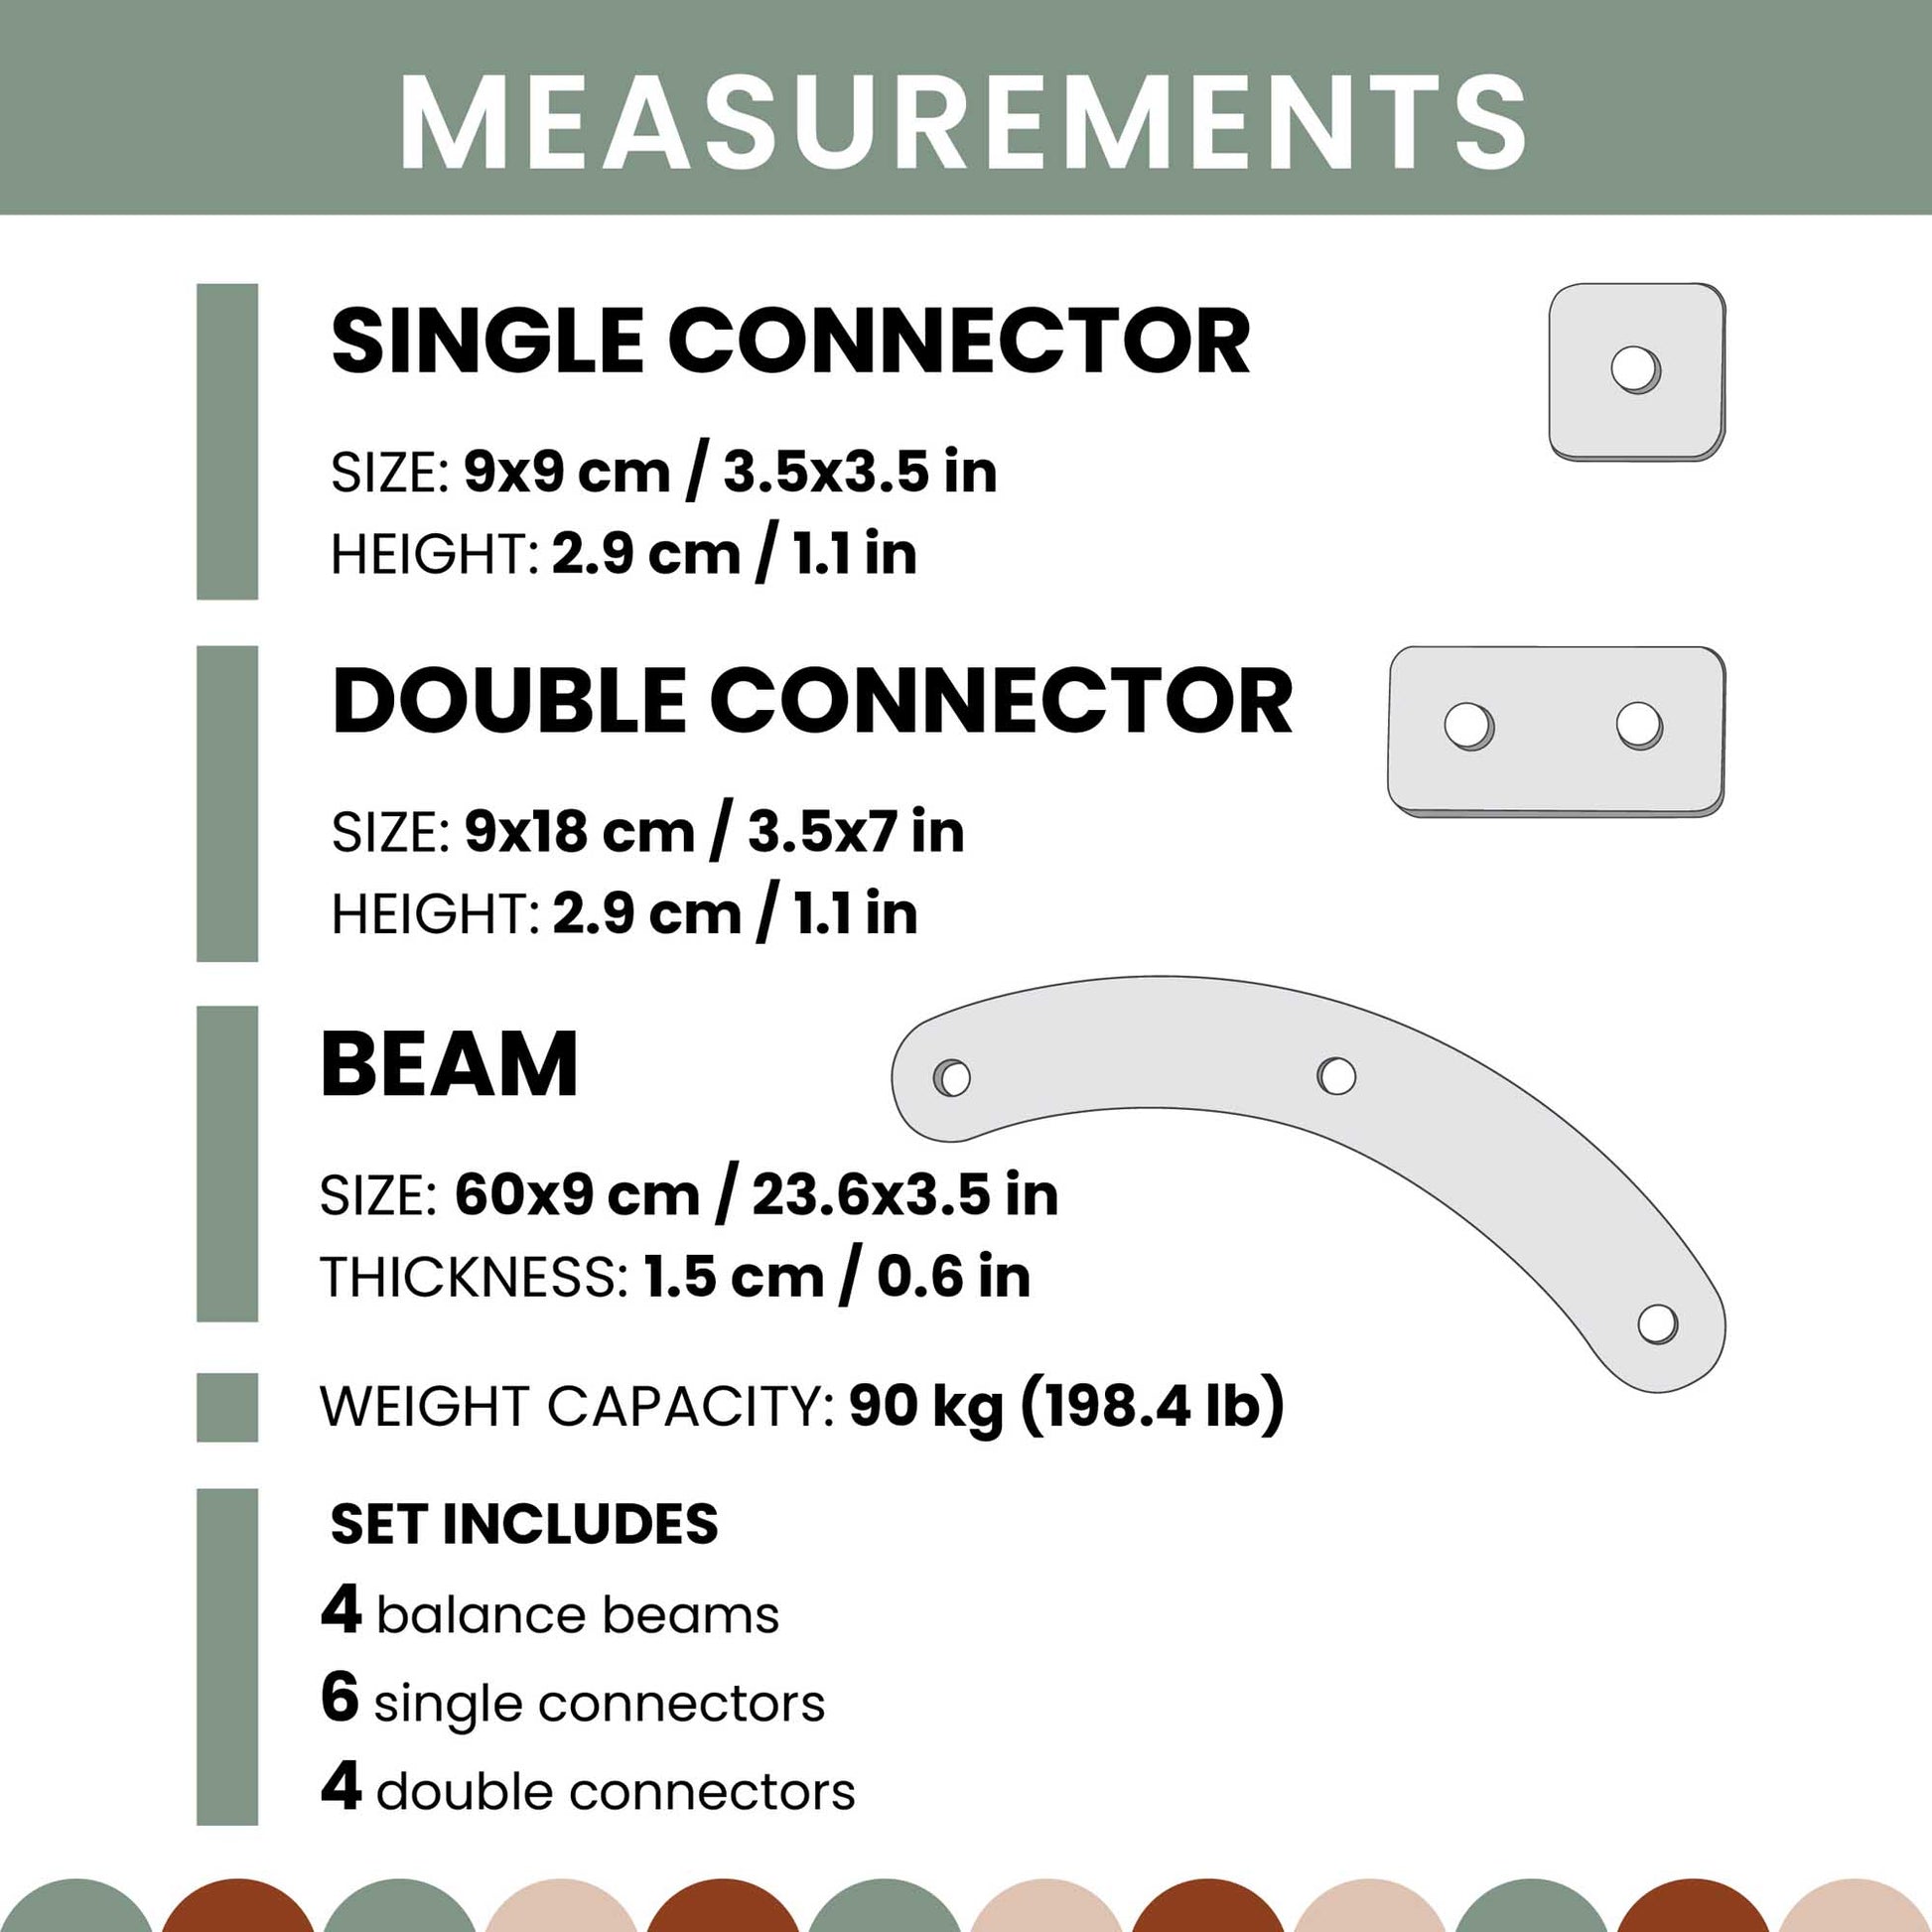 A diagram illustrating the measurements of a double connector in a Round Balance Beams Set.